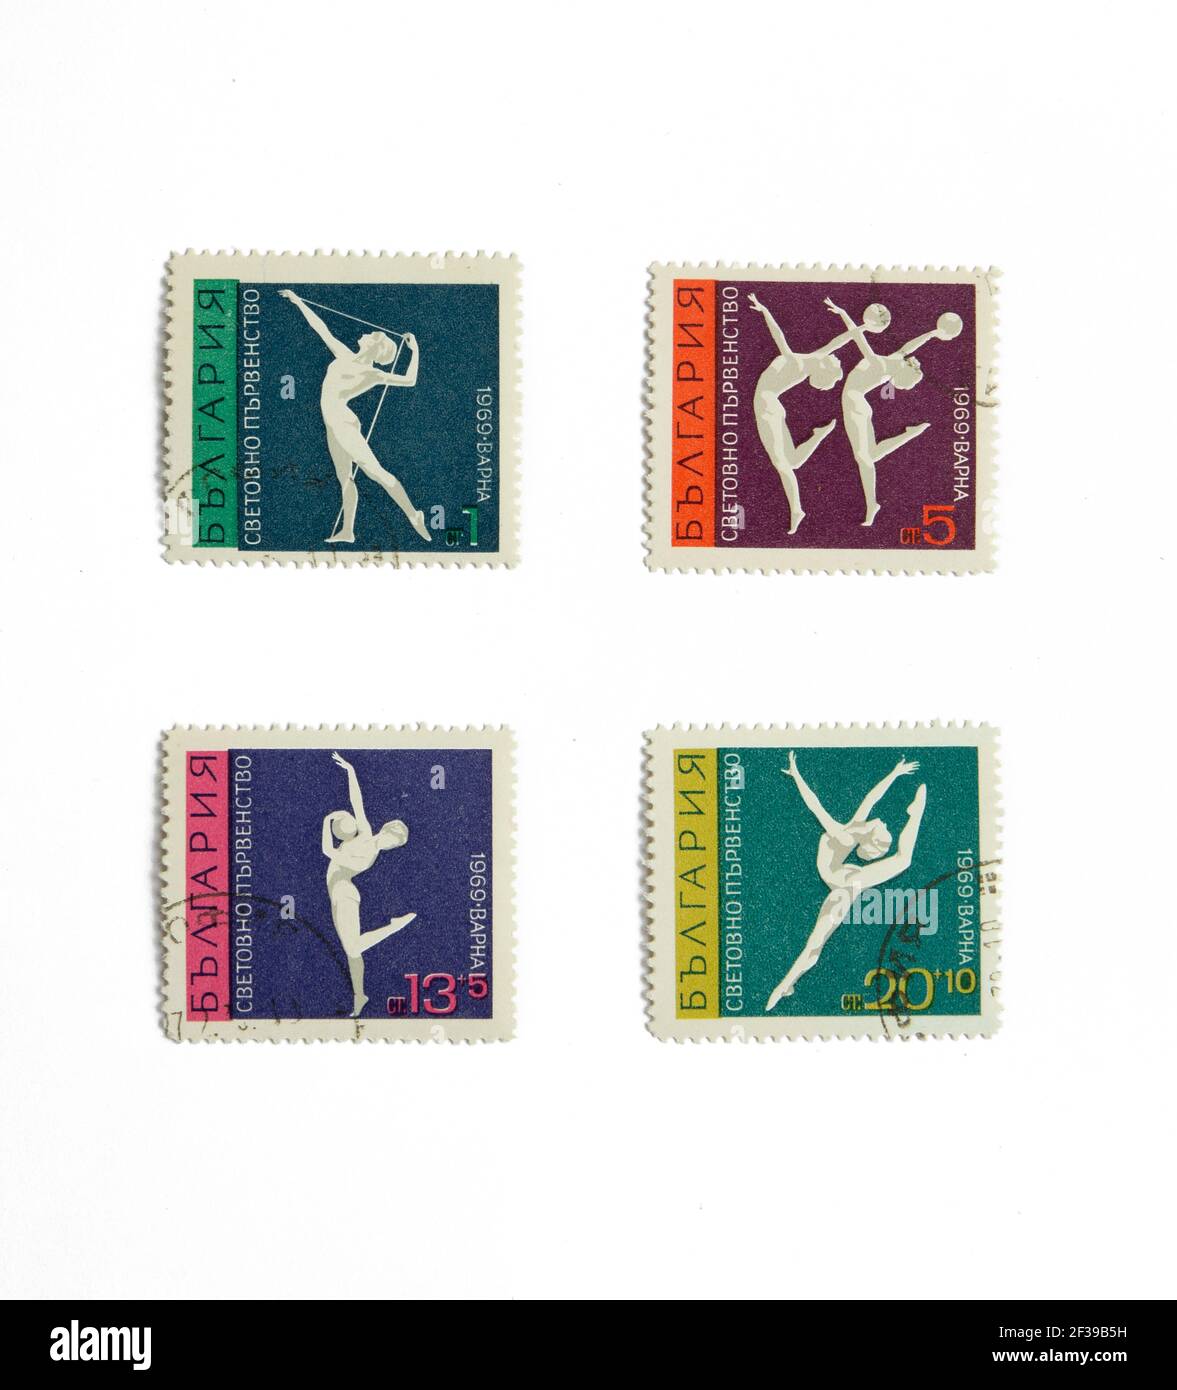 05.03.2021 Istanbul Turkey - Used and Cancelled Stamp. shows Gymnastics circa1969 Stock Photo